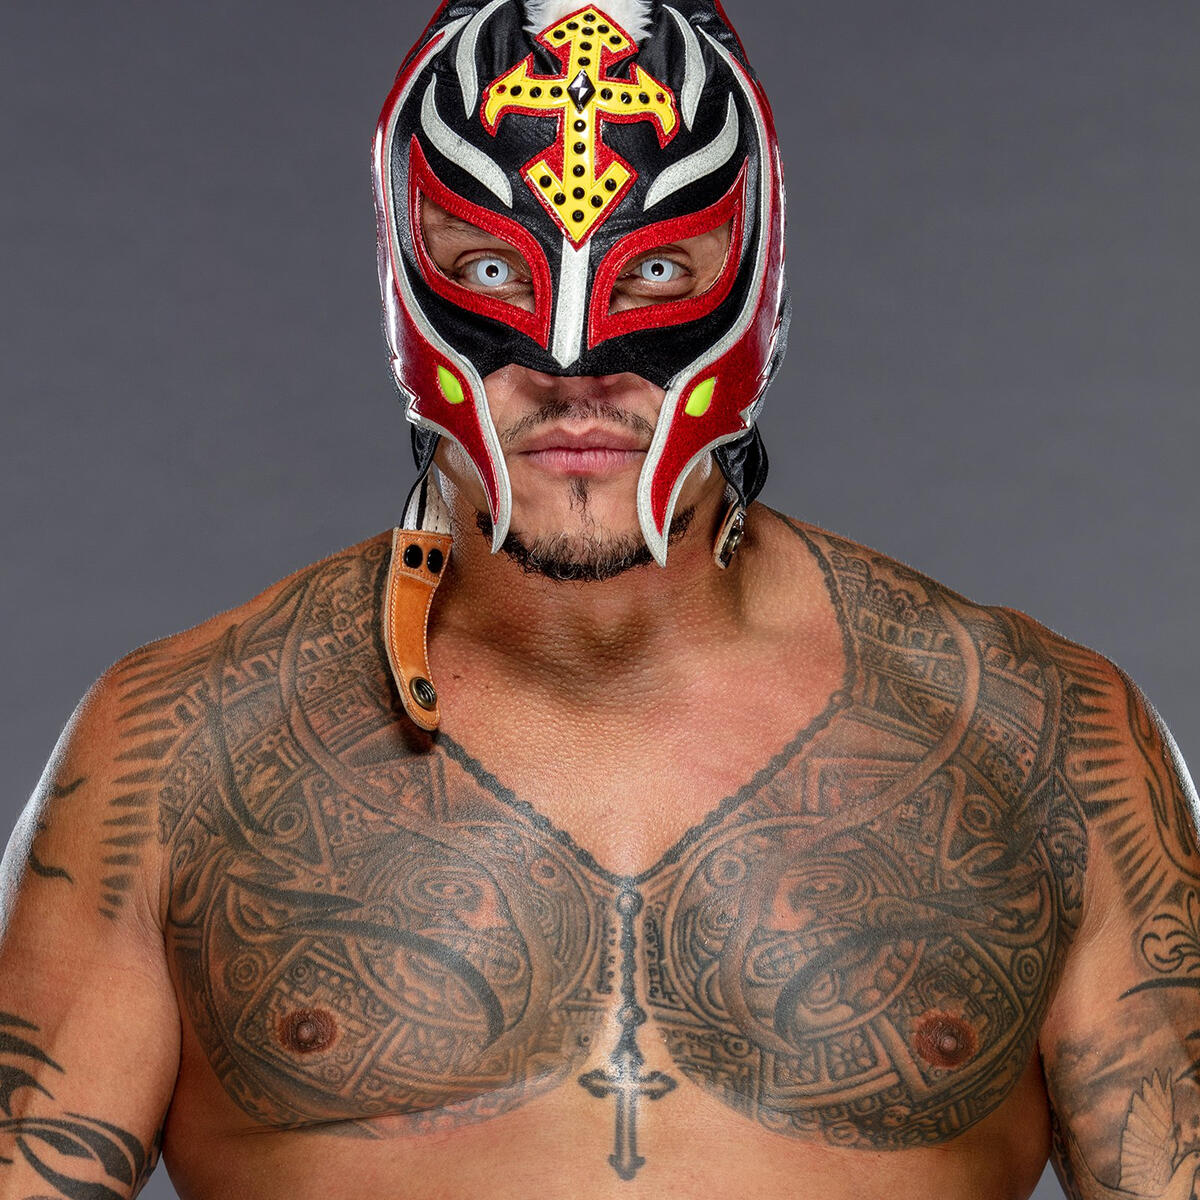 Rey Mysterio Png File  Rey Mysterio Chest Tattoo Transparent Png   Transparent Png Image  PNGitem